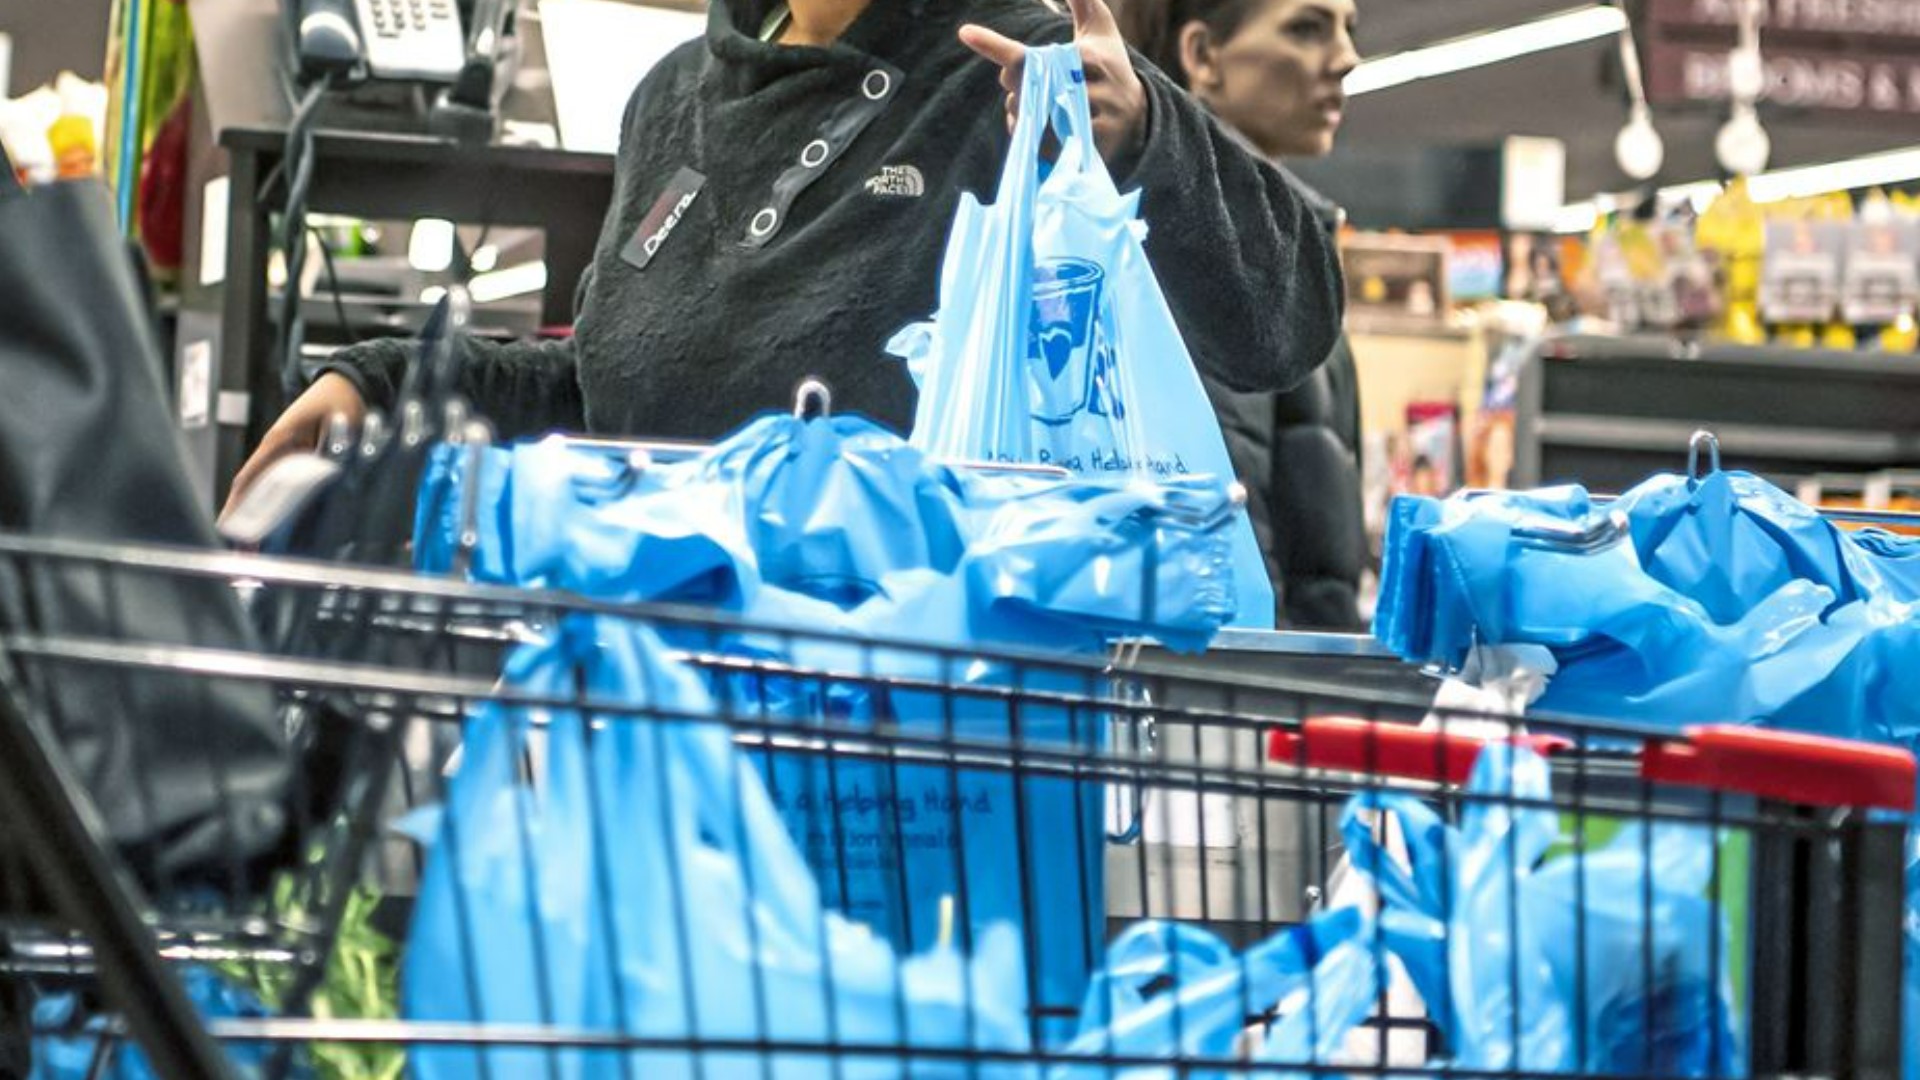 The central Ohio stores are joining Cuyahoga County and Erie, Pa. as the first areas to remove the bags from its supermarkets.